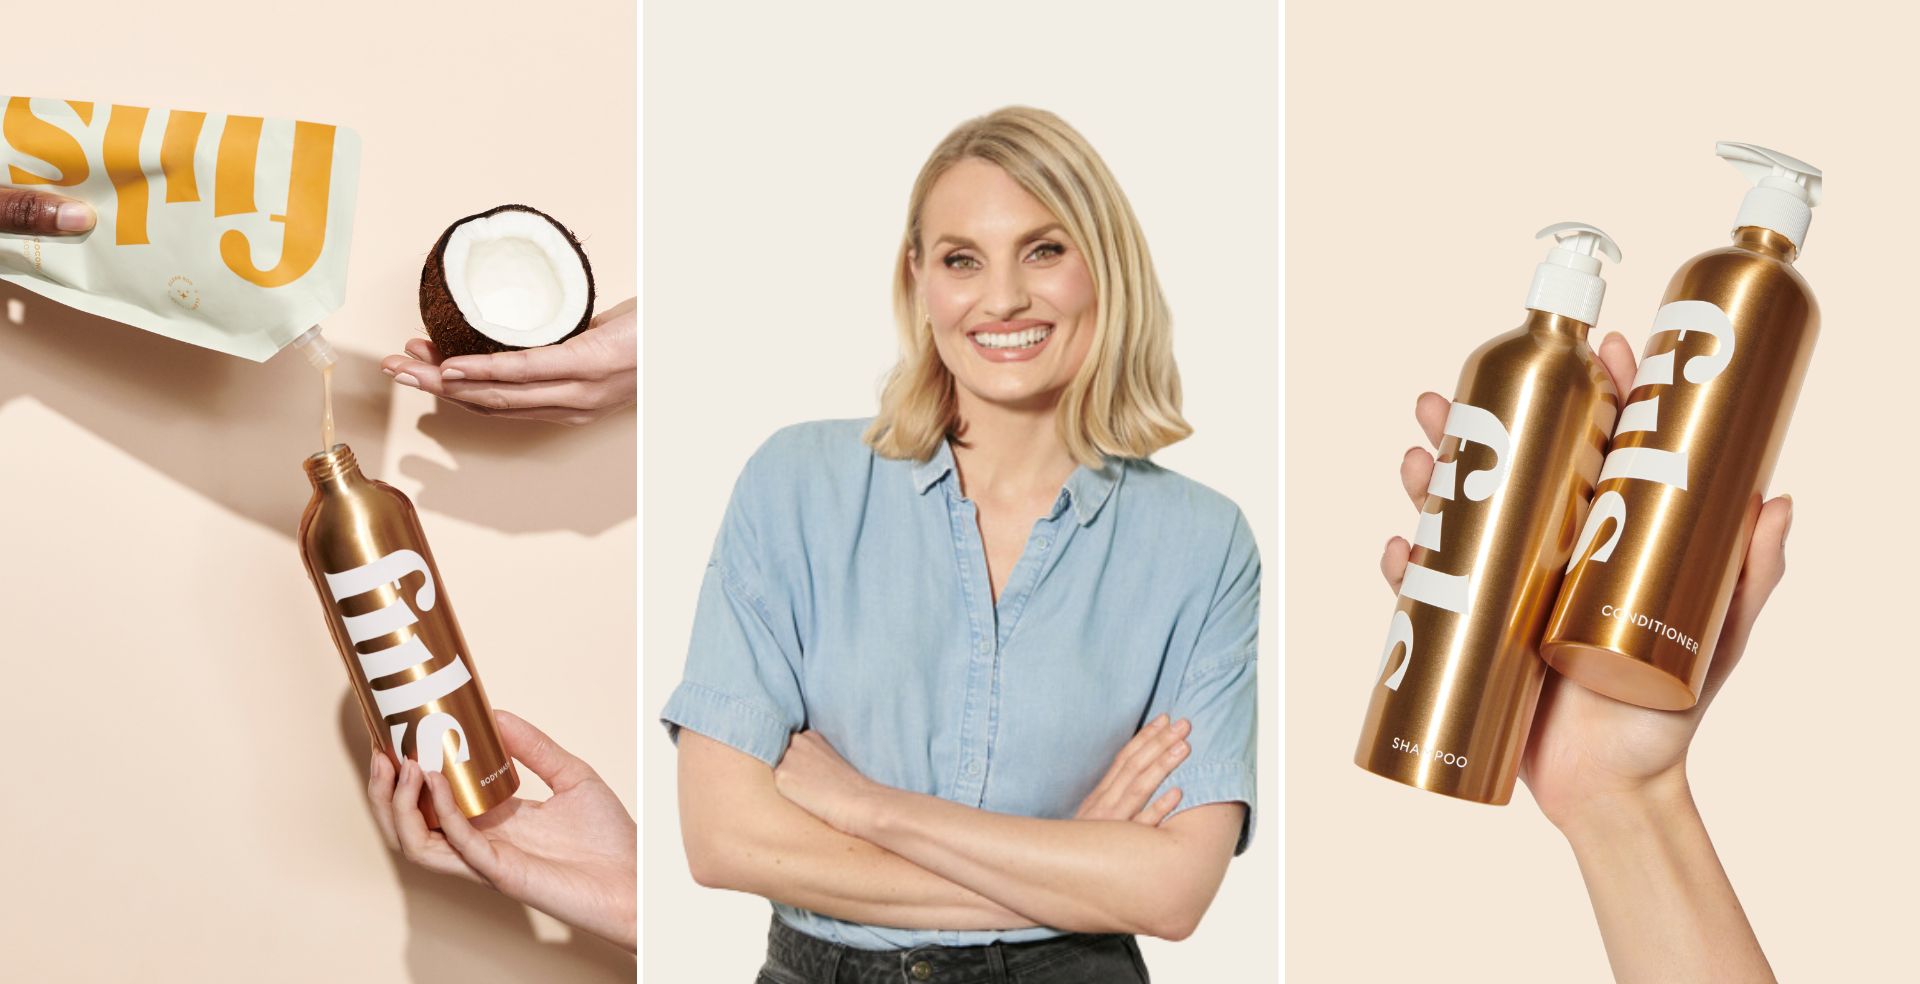 Anna Priadka, Founder of sustainable beauty brand Fiils stood next to a fiils refillable bottle 